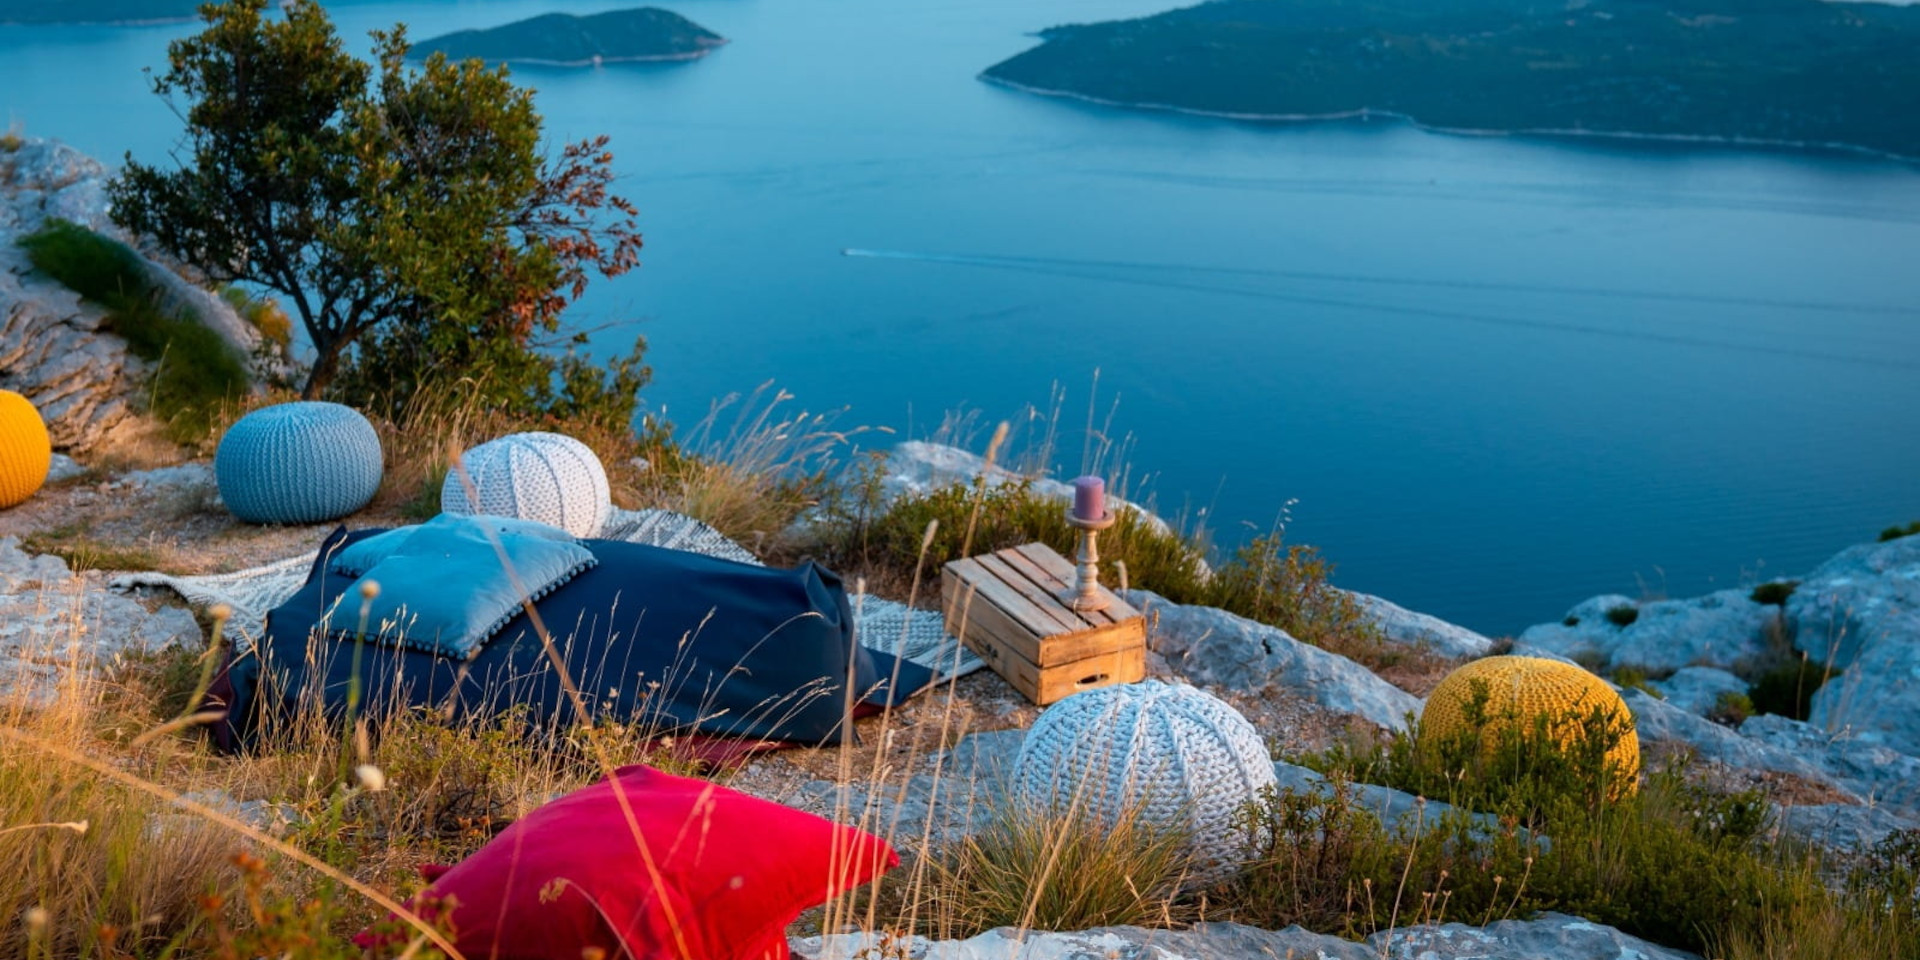 Frey Luxury Bean Bags, perfect for nature escapes in Dubrovnik location. Big blue & burgundy 2 face bean bags to enjoy views.